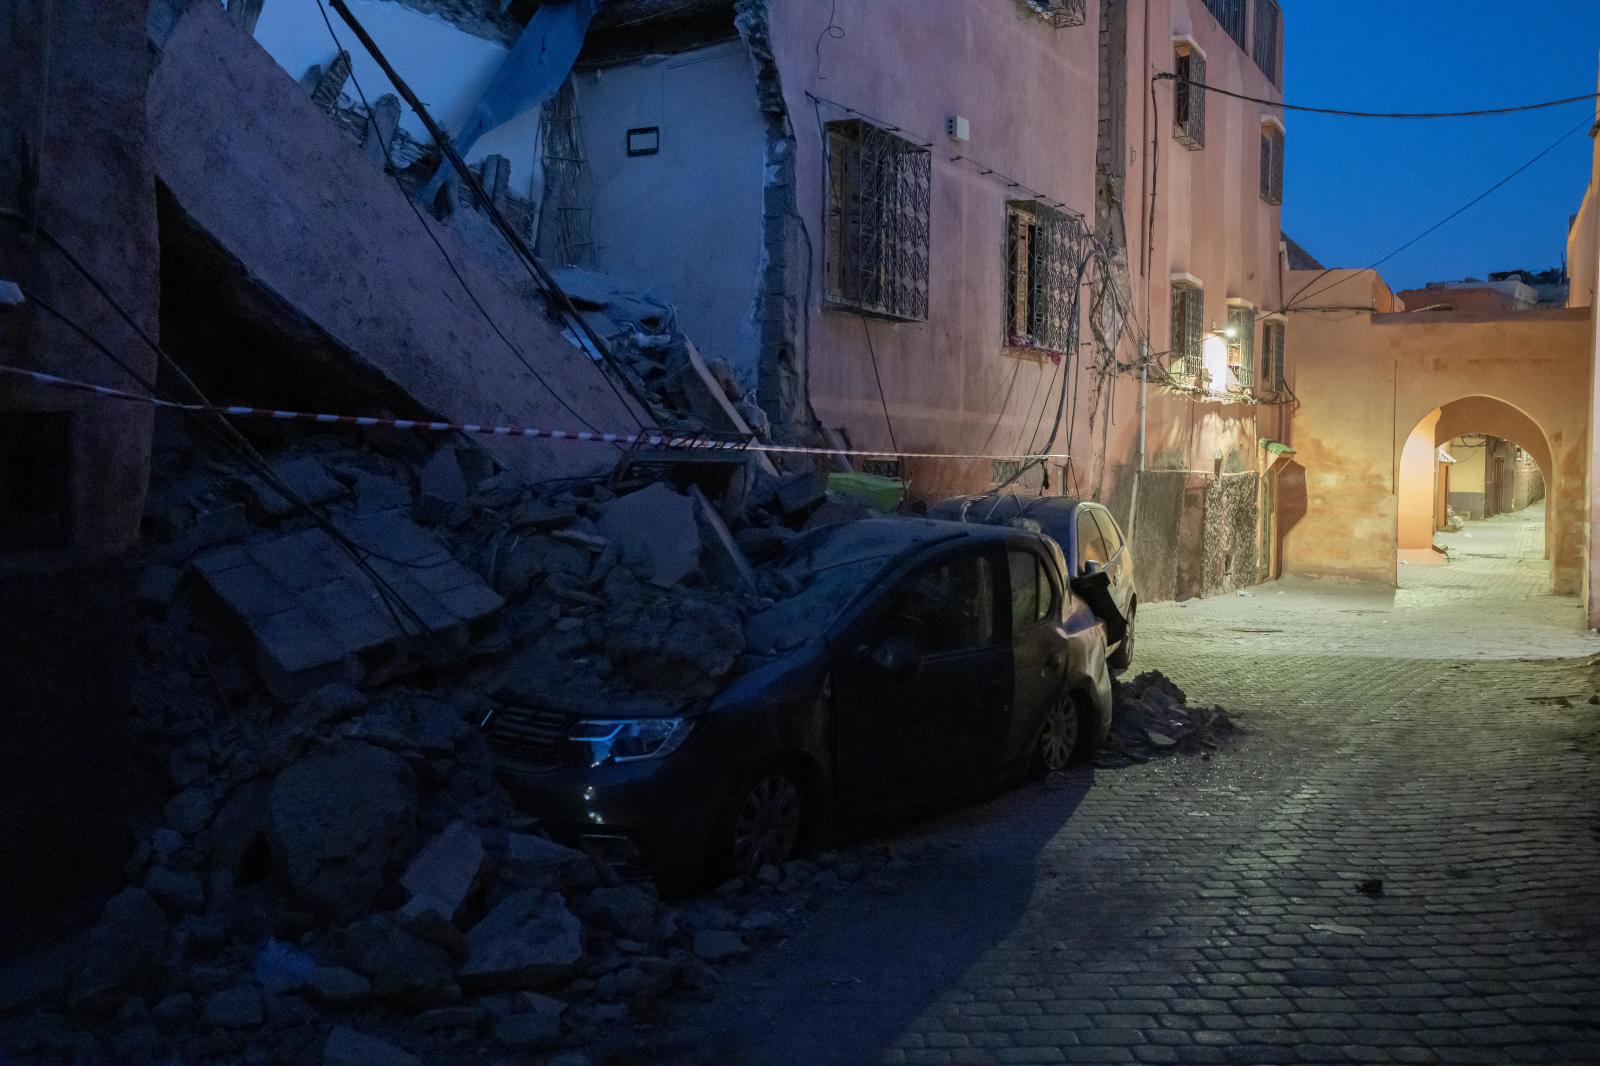 Rubble on vehicles damaged by a...Nariman El-Mofty) Marrakesh MAR